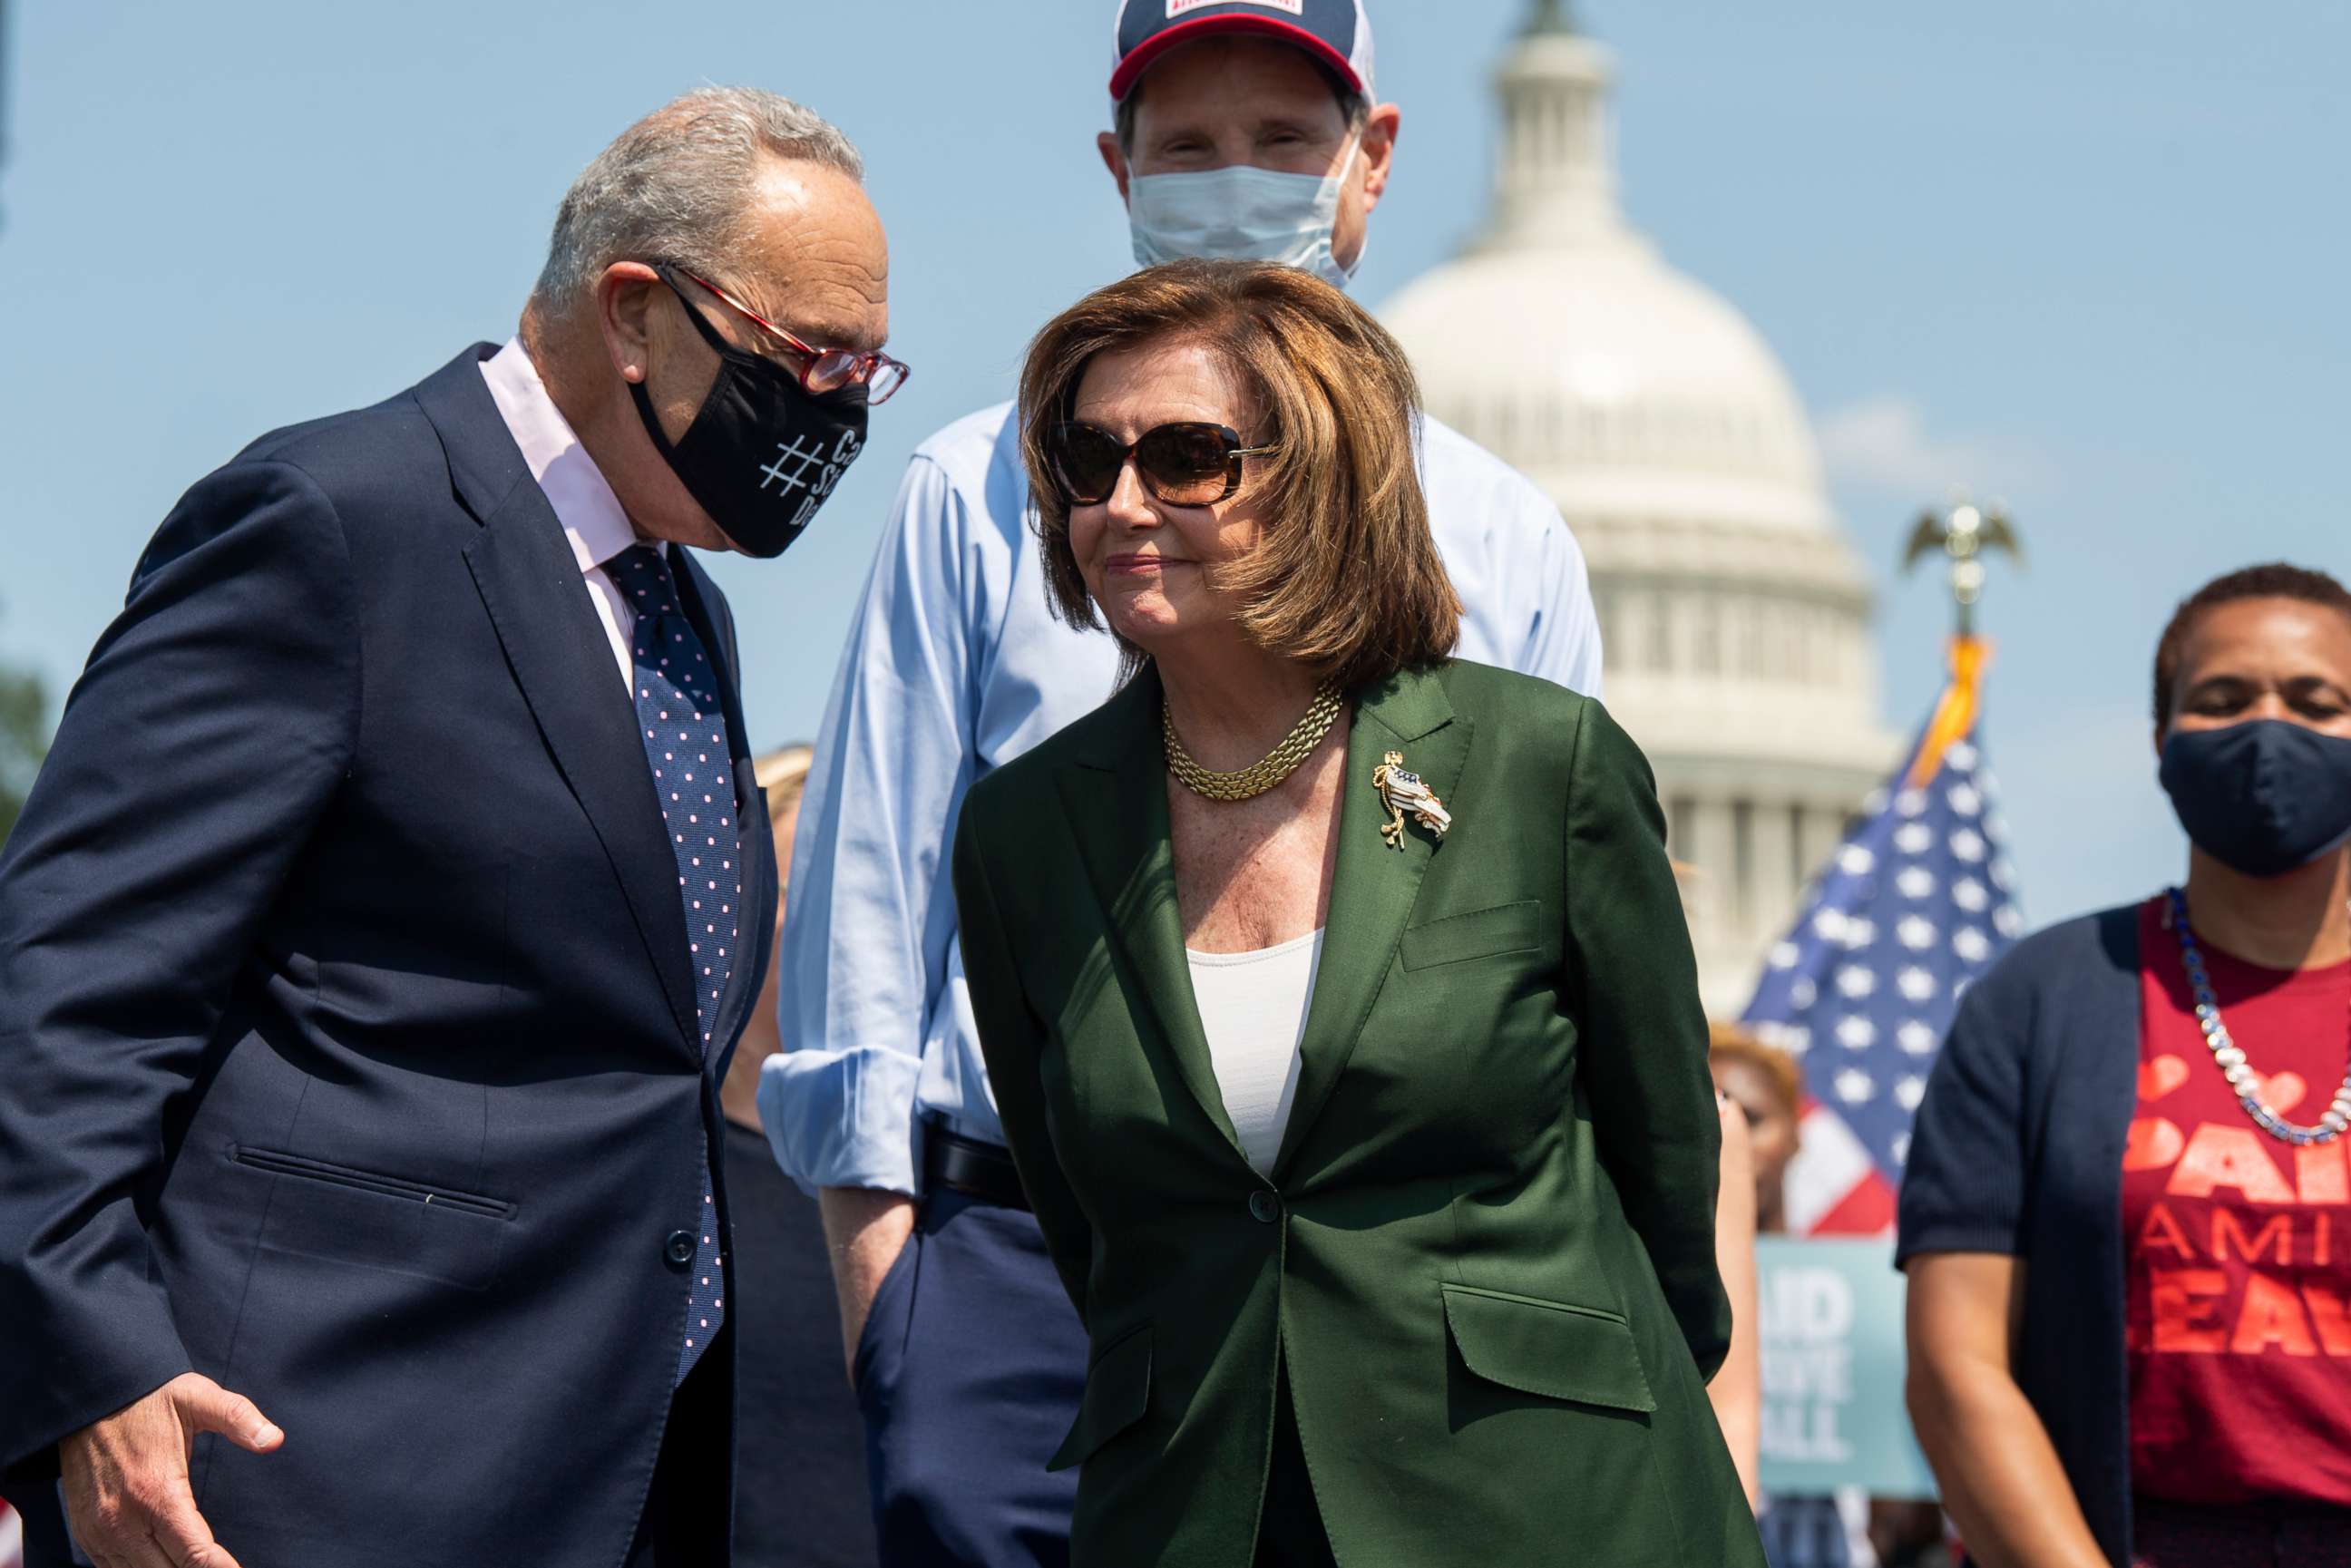 PHOTO: House Speaker Nancy Pelosi and Senate Majority Leader Charles Schumer attend a rally to advocate for paid family and medical leave, near the Capitol Reflecting Pool in Washington, Aug. 04, 2021.